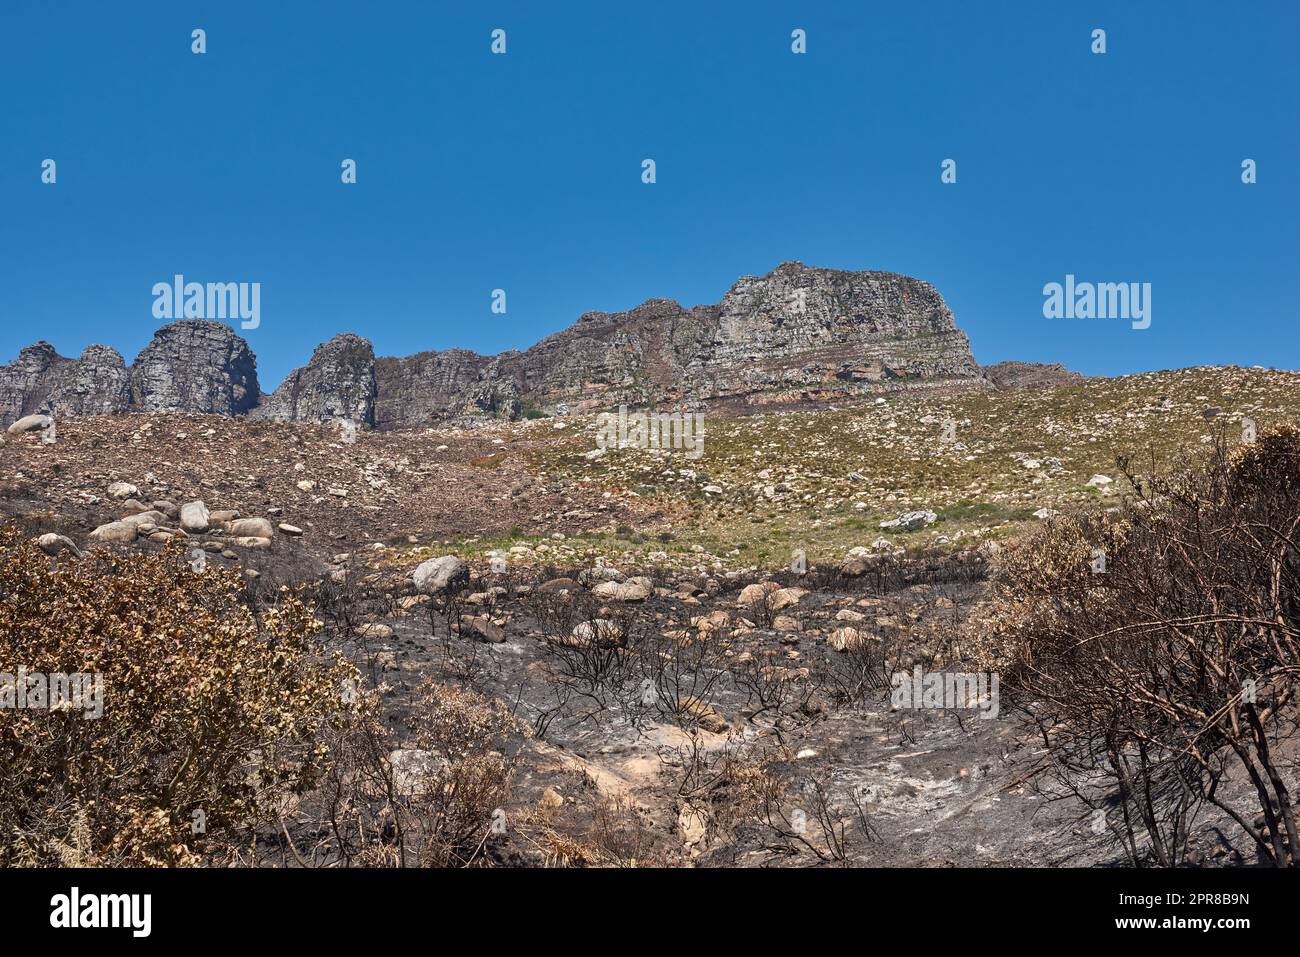 Landscape of burnt trees after a bushfire on Table Mountain, Cape Town, South Africa. Outcrops of a mountain against blue sky with dead bushes. Black scorched tree trunks, the aftermath of wildfires Stock Photo